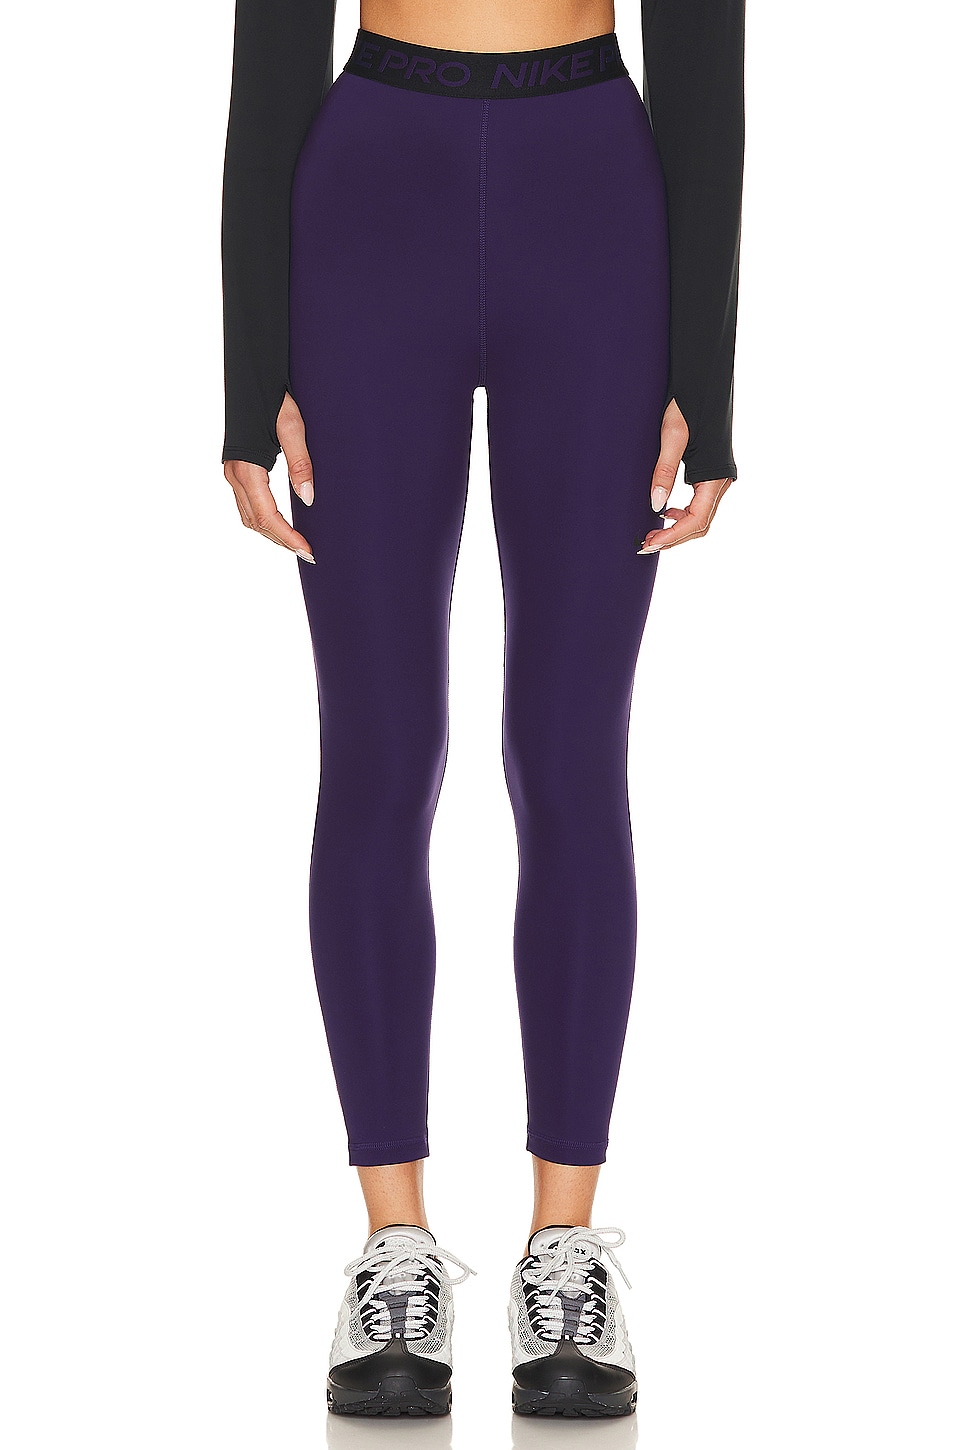 Beyond Yoga Women's Pros AND Contrast High Waisted Midi Legging, Black,  X-Small : Clothing, Shoes & Jewelry 